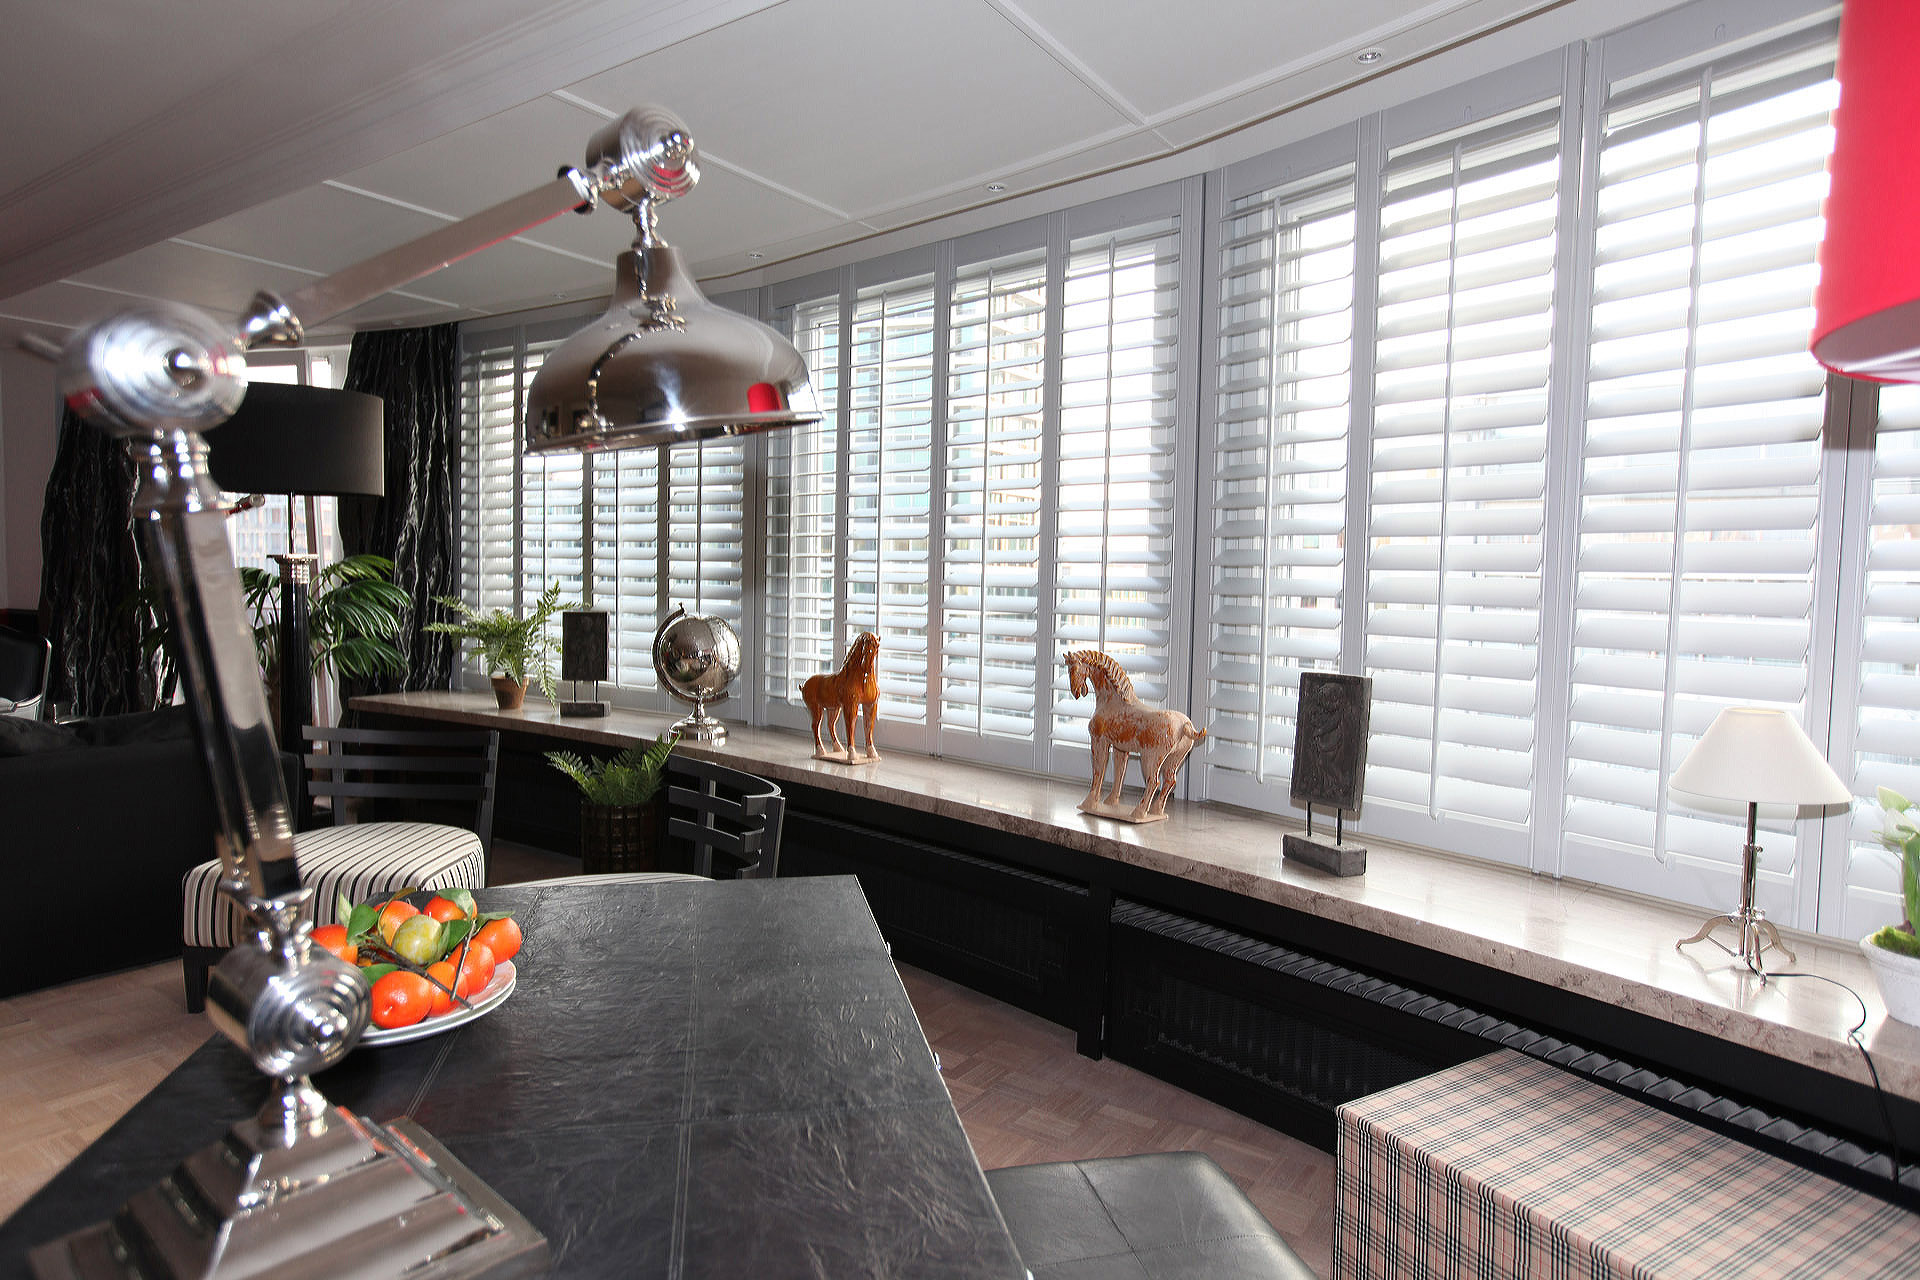 Shutters and Blinds - Marcotte Style